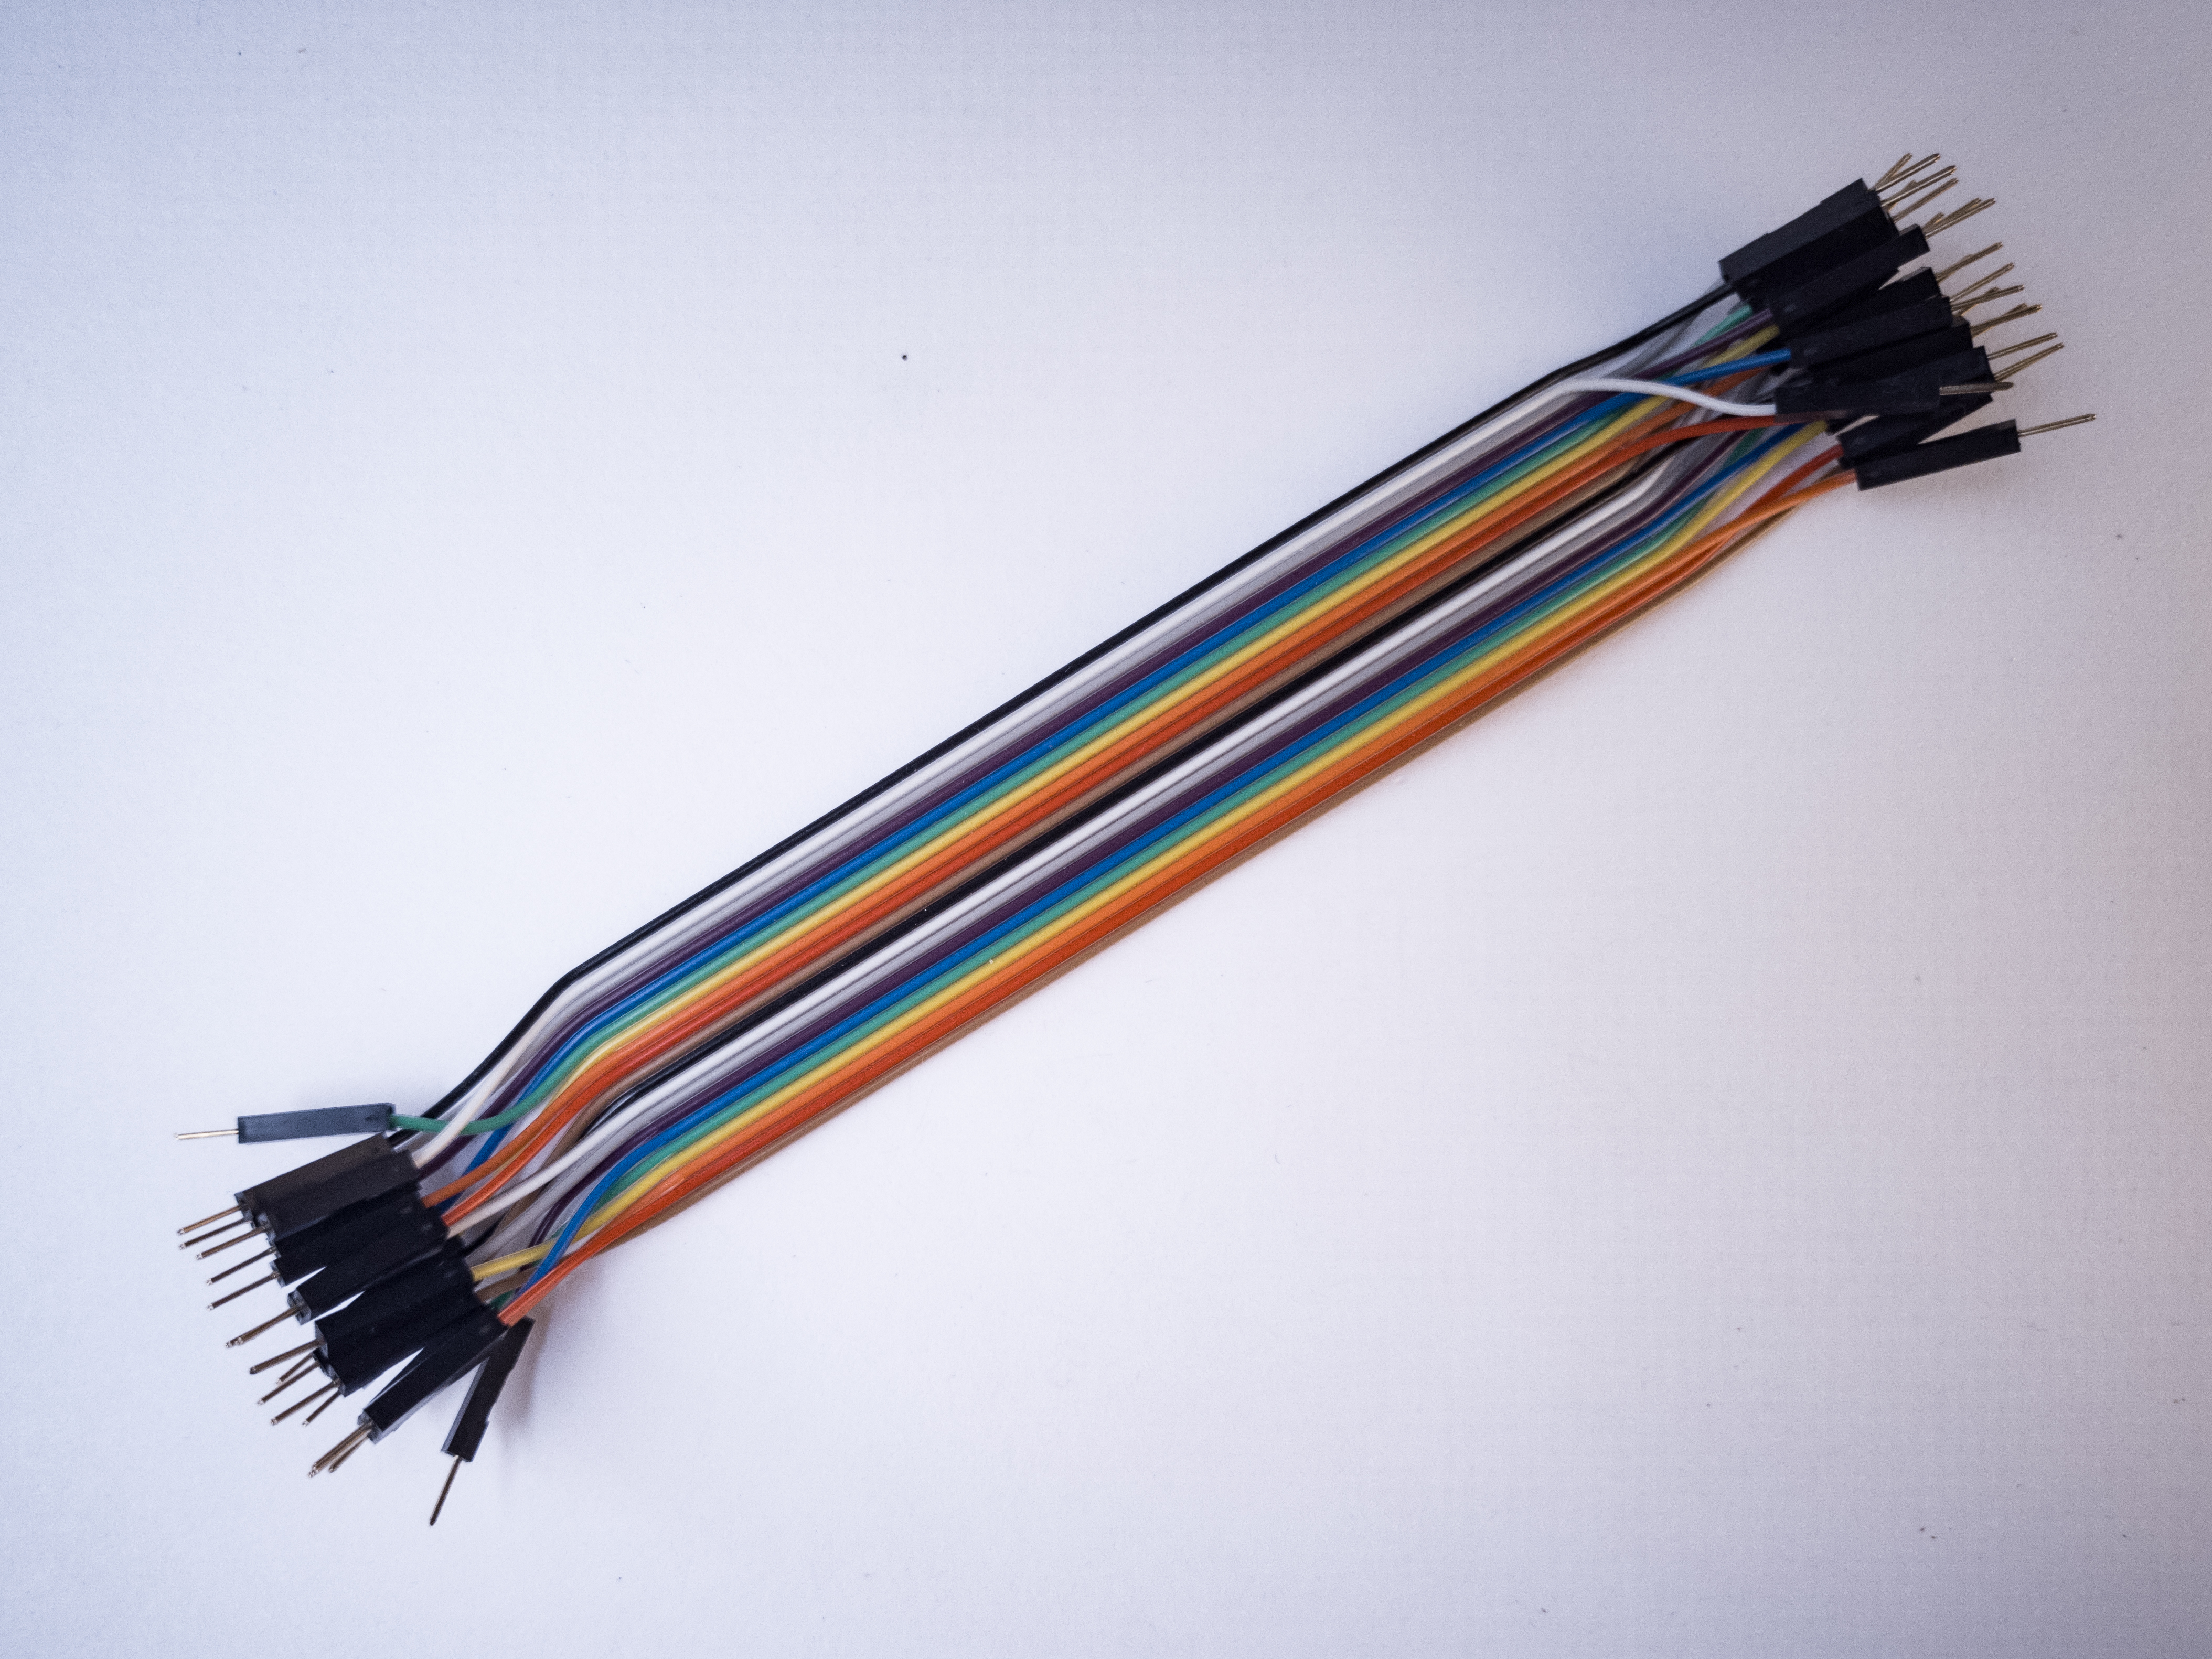 Photo of flexible jumper wires. These wires are quick for breadboard prototyping, but can get messy when you have lots of them on a board.